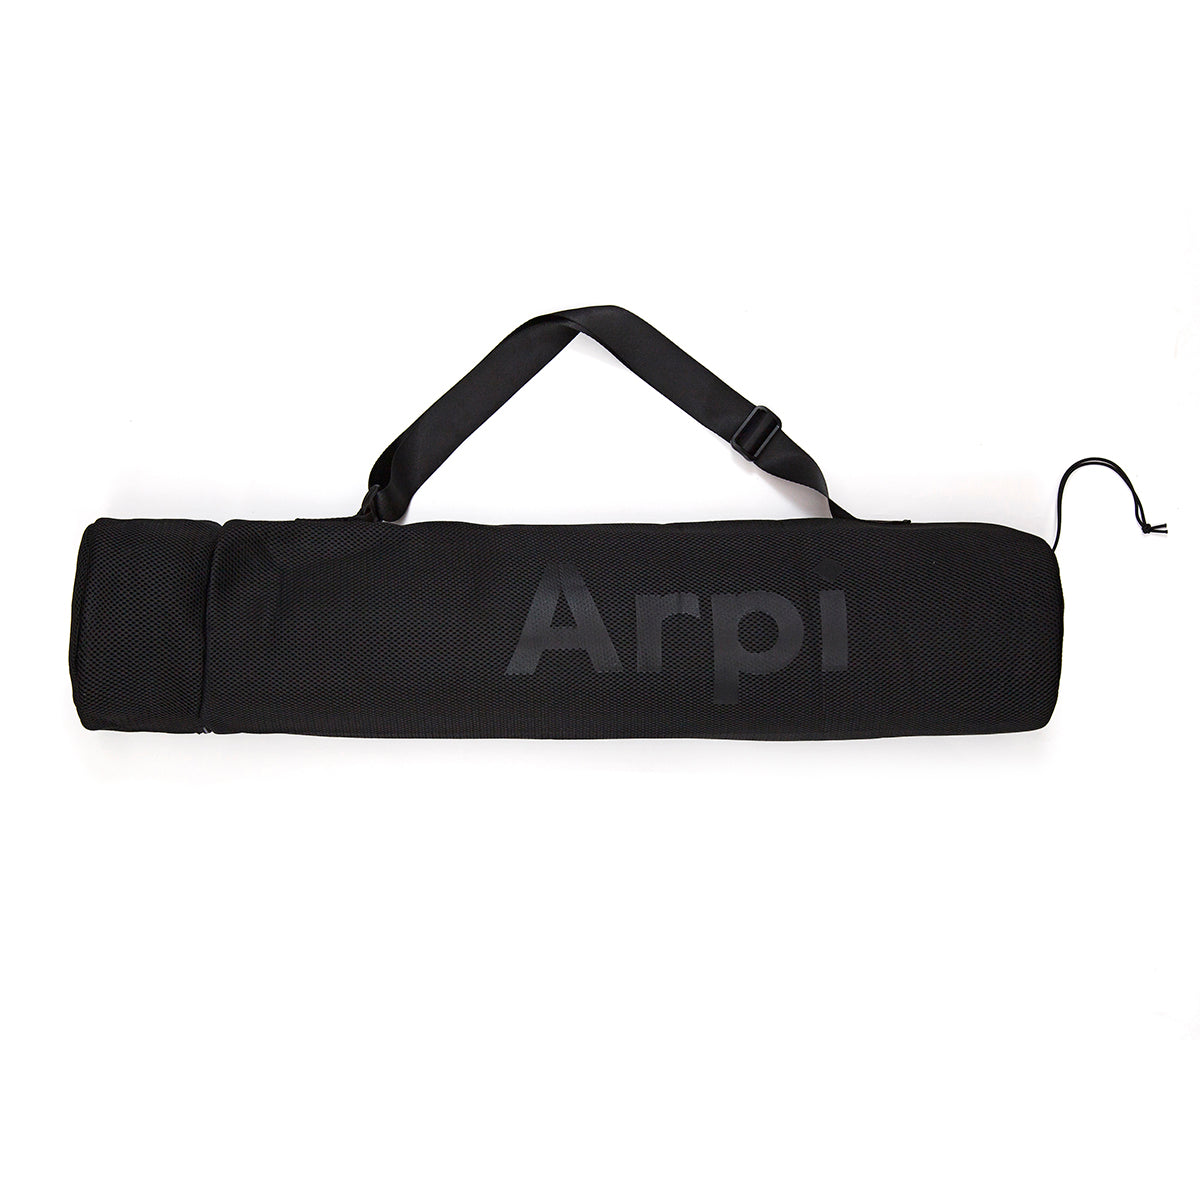 ARPI - The Yoga bag for headstand mat